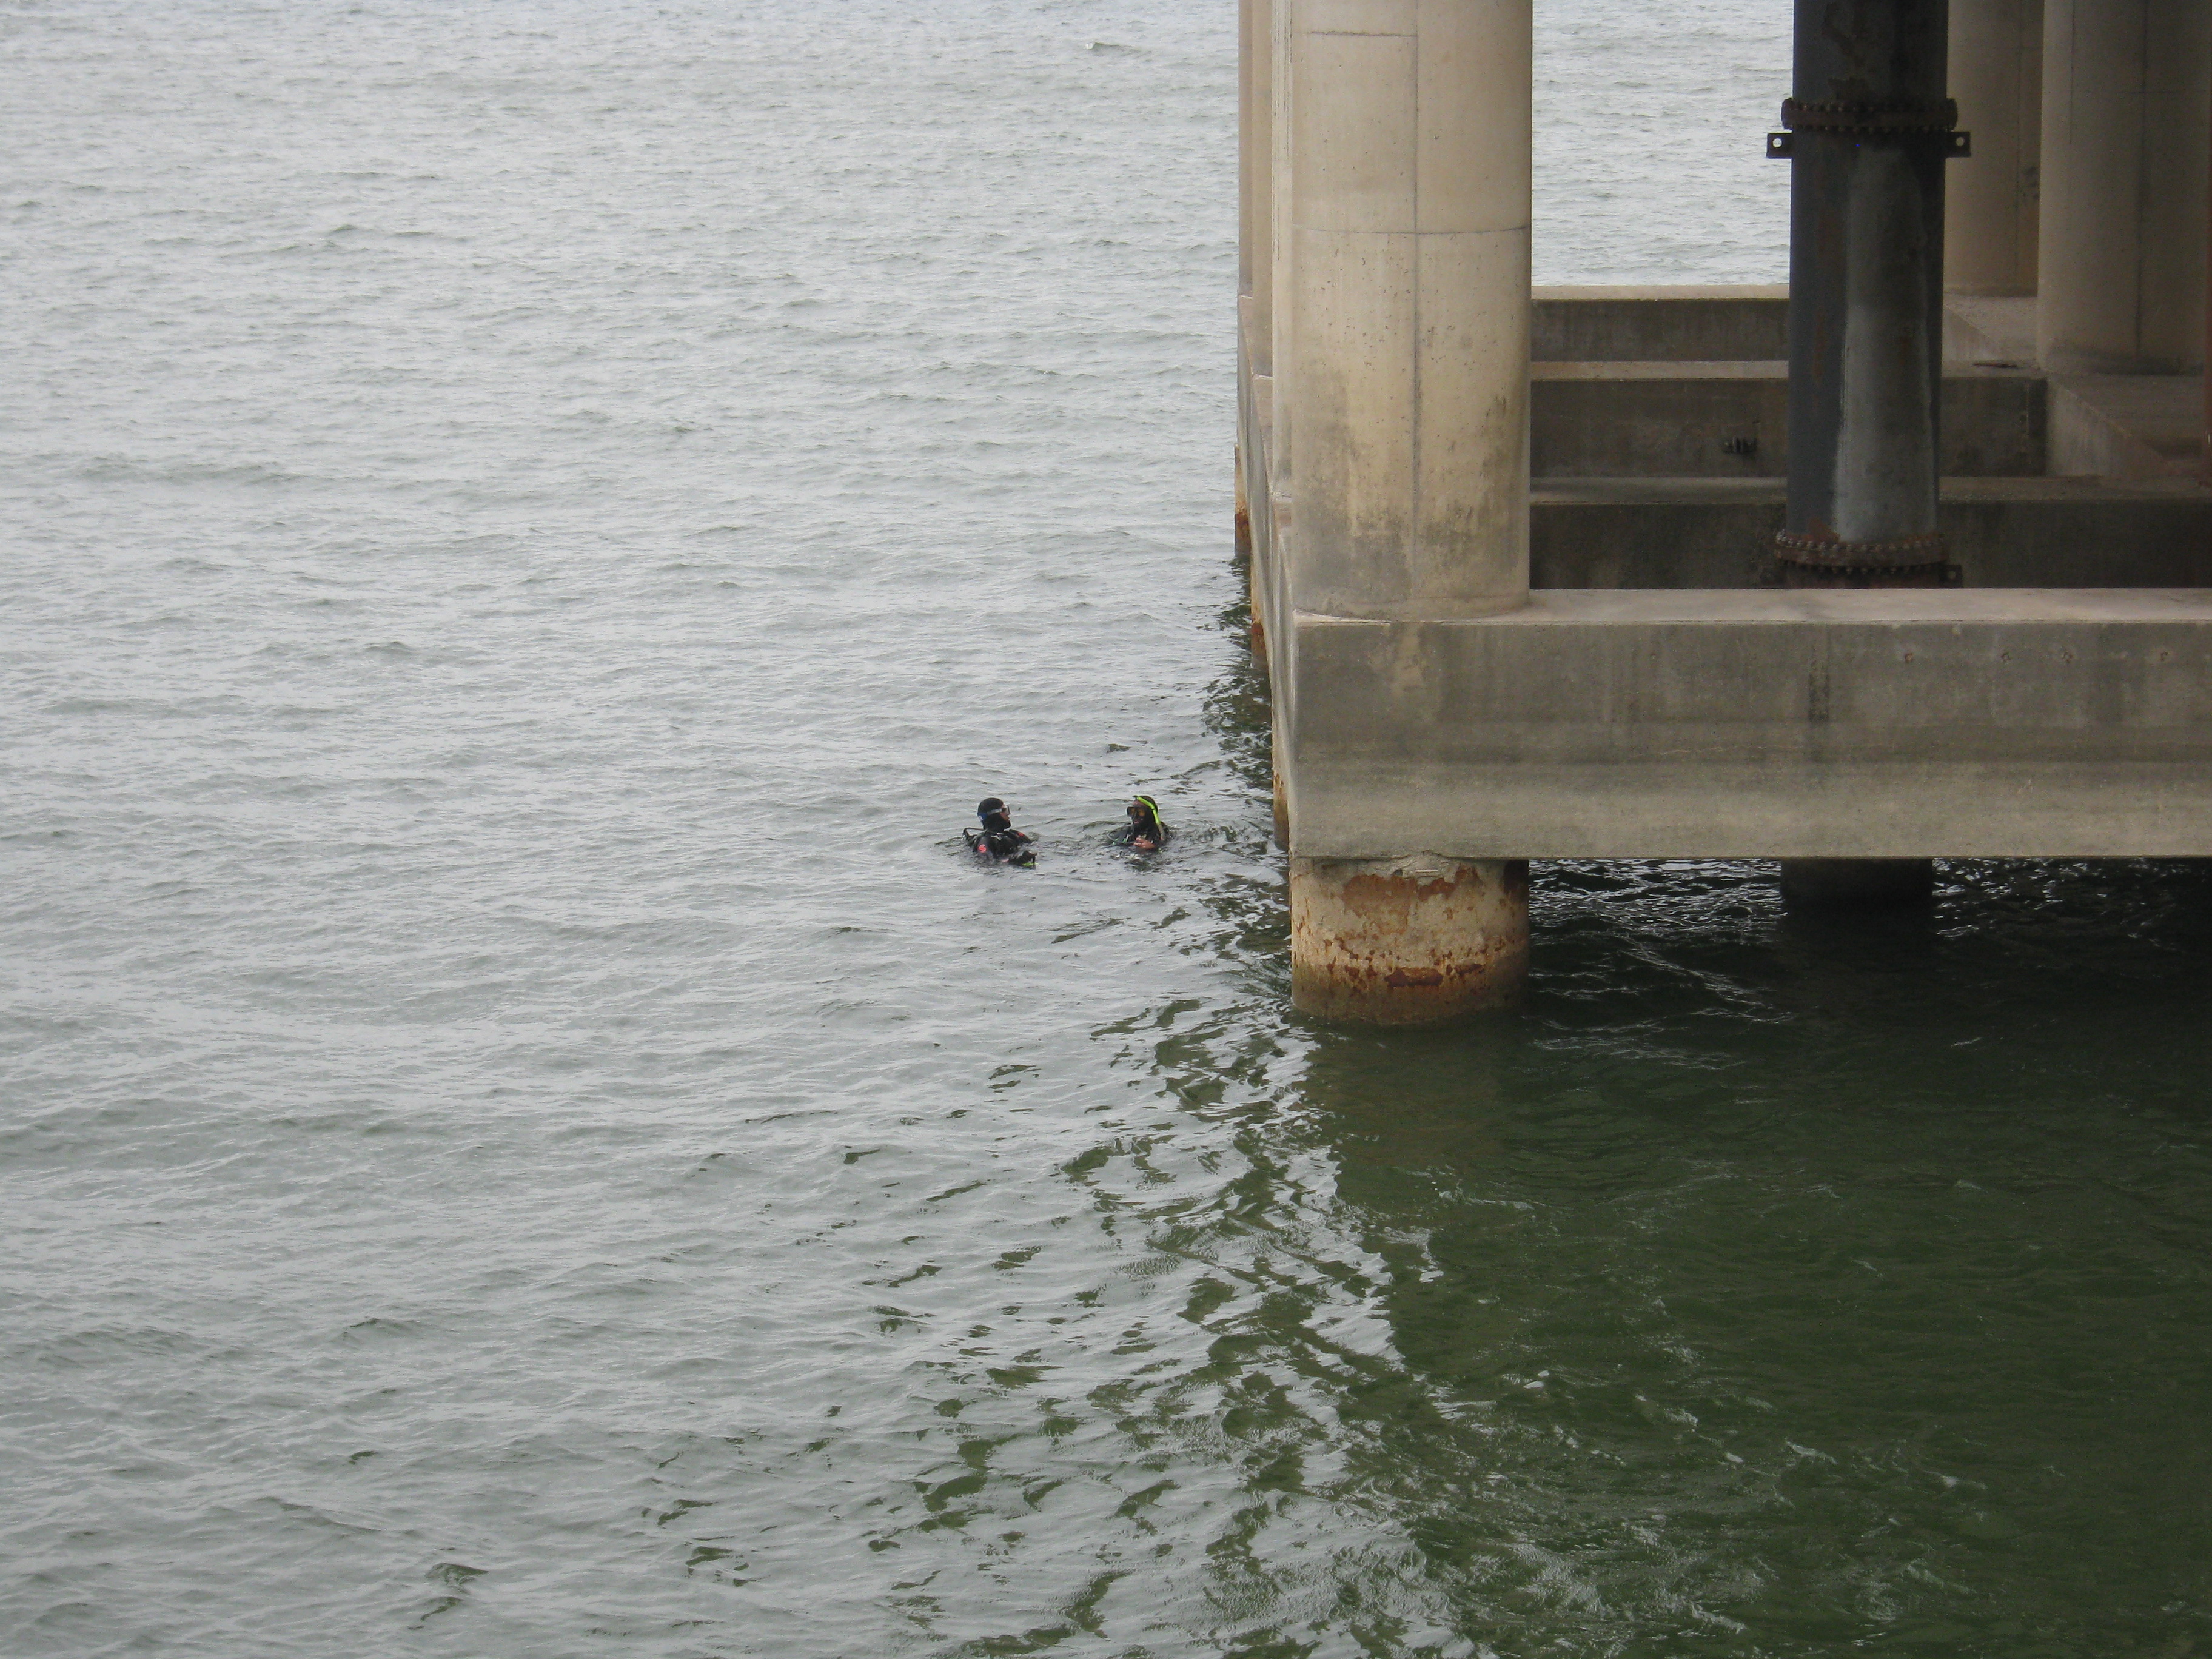 Two scuba divers, heads above water mid-photo, dwarfed by the concrete tower they will be inspecting